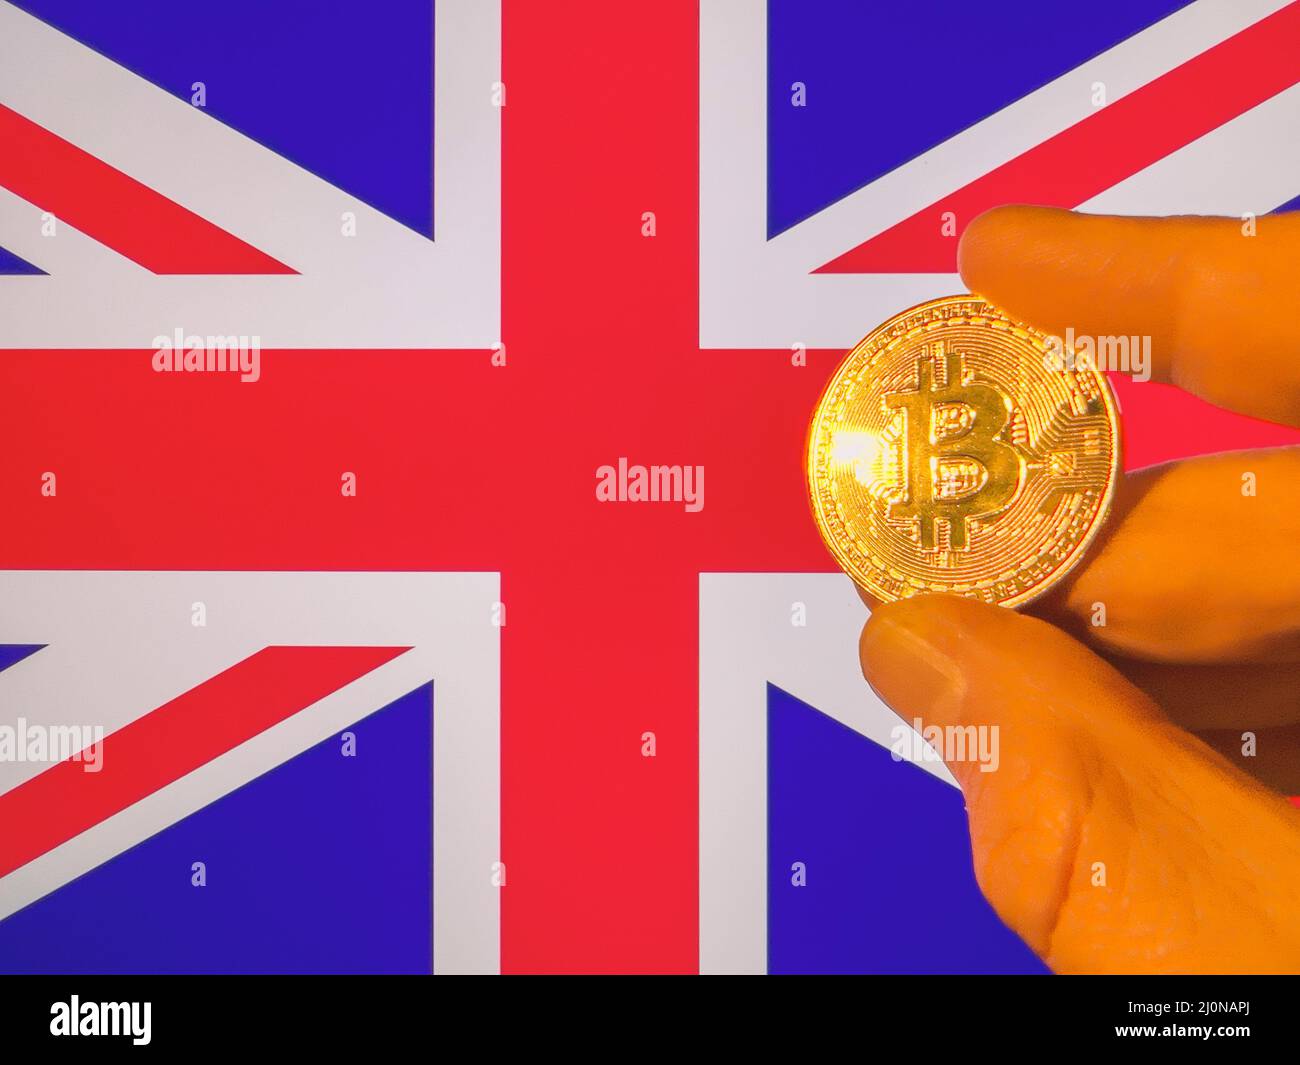 Holding a physical golden Bitcoin over the British flag. England as cryptocurrency and blockchain technology investor. Financial background Stock Photo